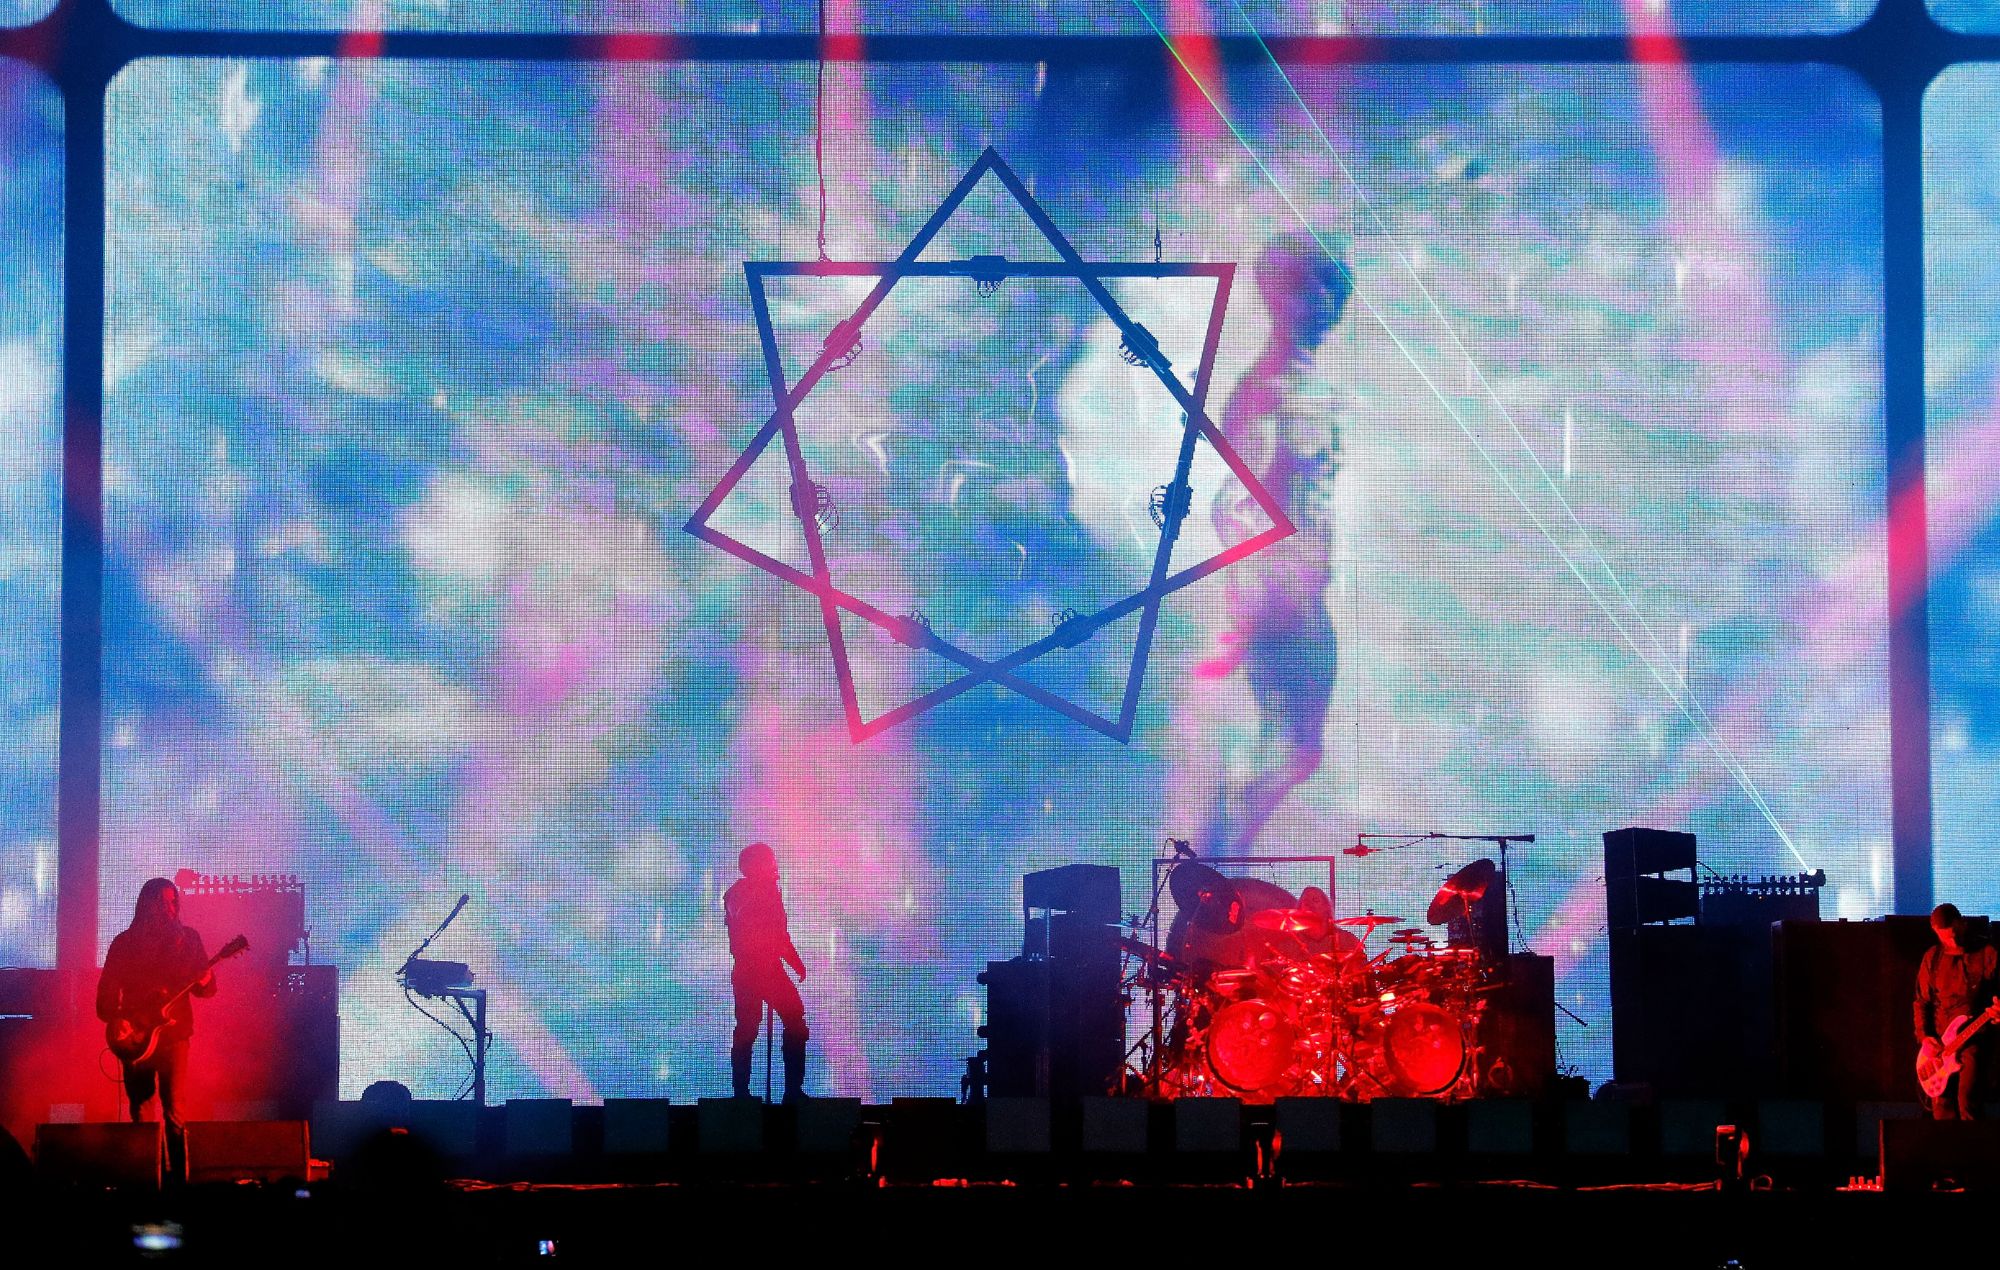 Adam Jones, Maynard James Keenan, Danny Carey and Justin Chancellor of Tool perform live onstage during 2017 Governors Ball Music Festival